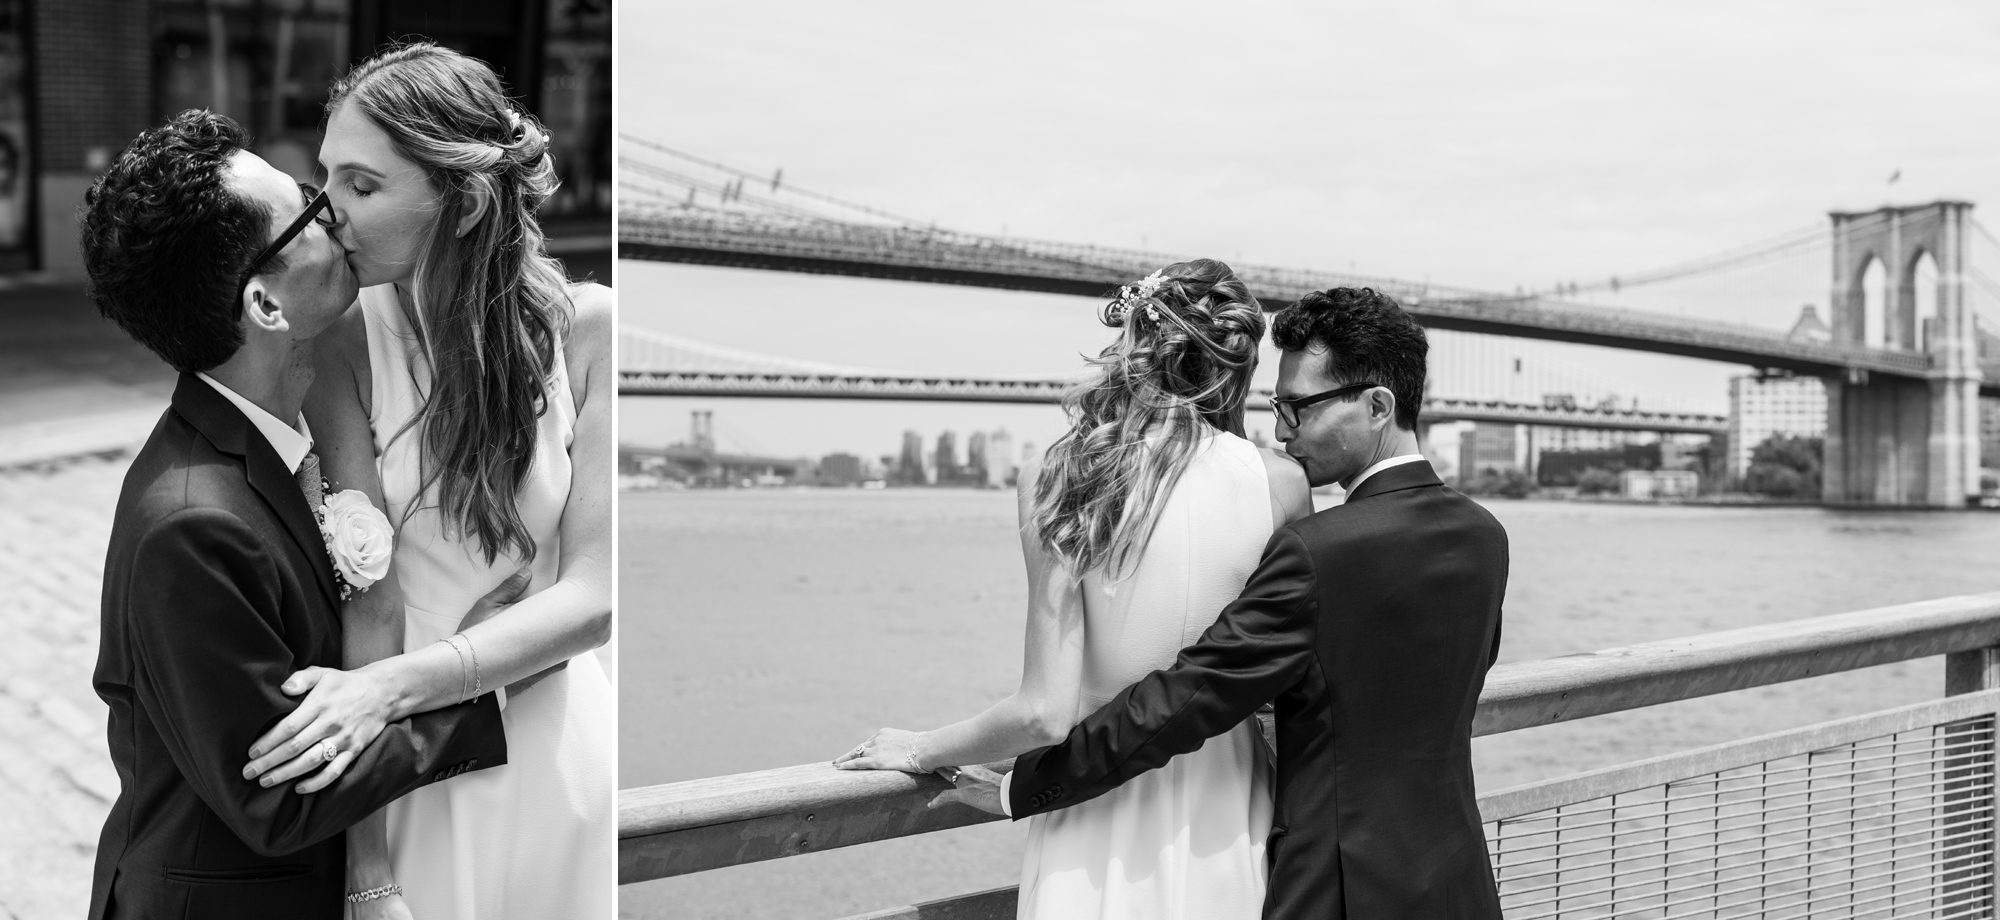 Black and White Elopement Photos South Street Seaport